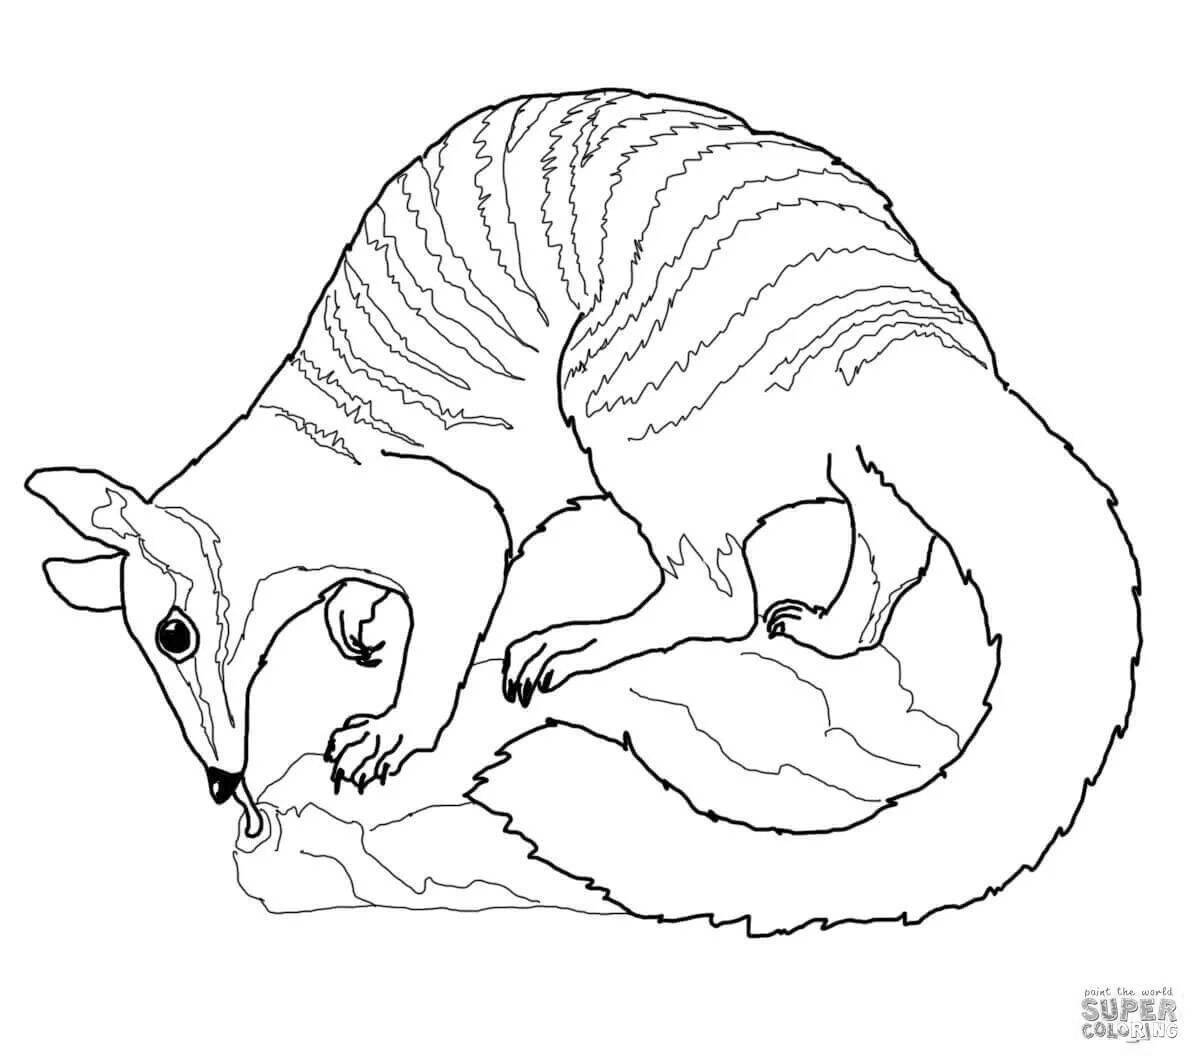 Cute spiral cat coloring page